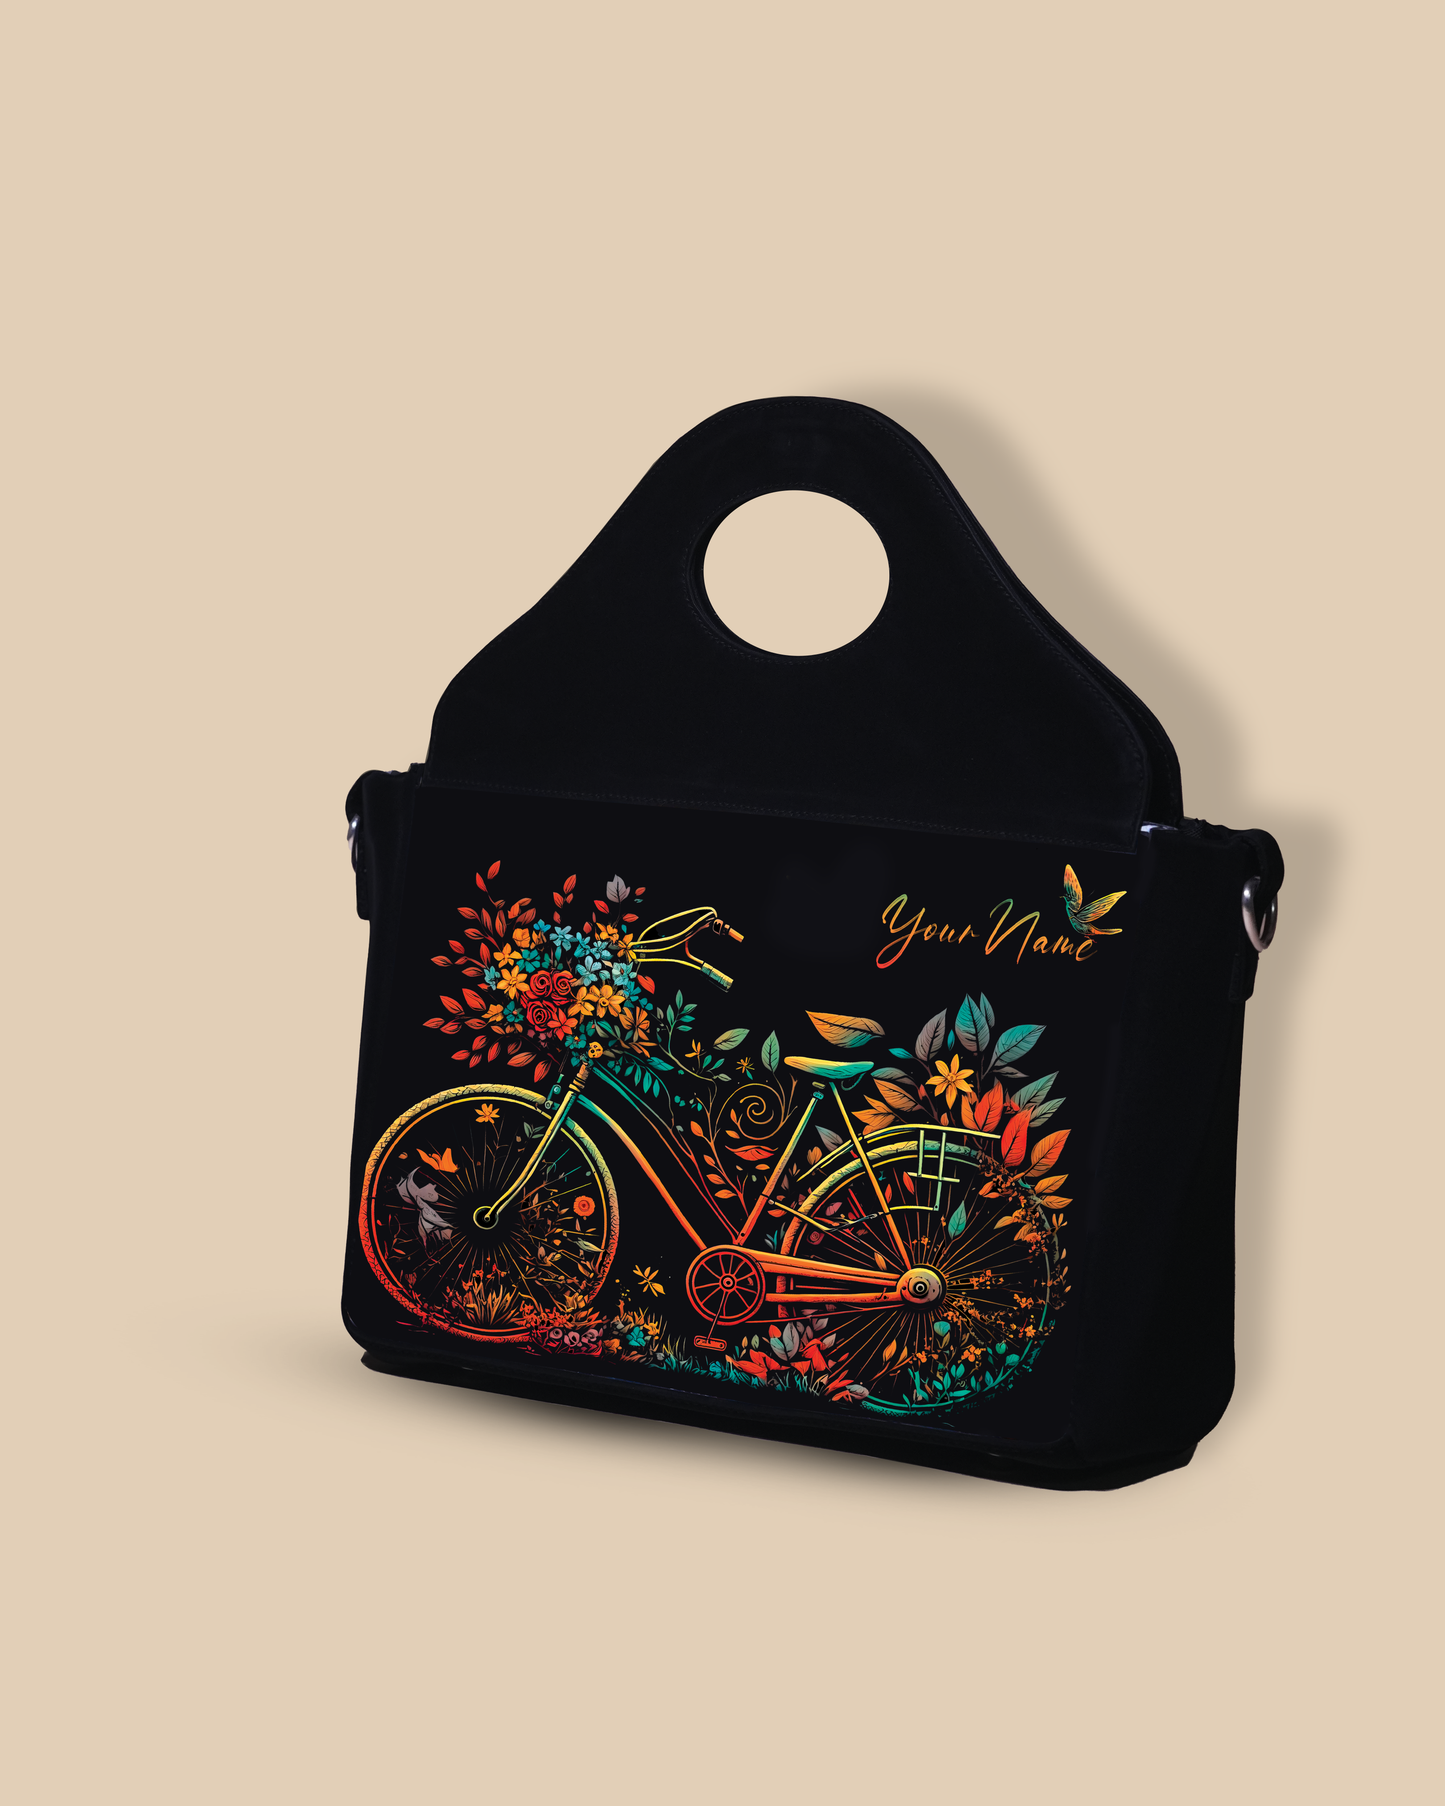 Customized Sling Purse Designed With Growing Nature On Colourfull Bicycle